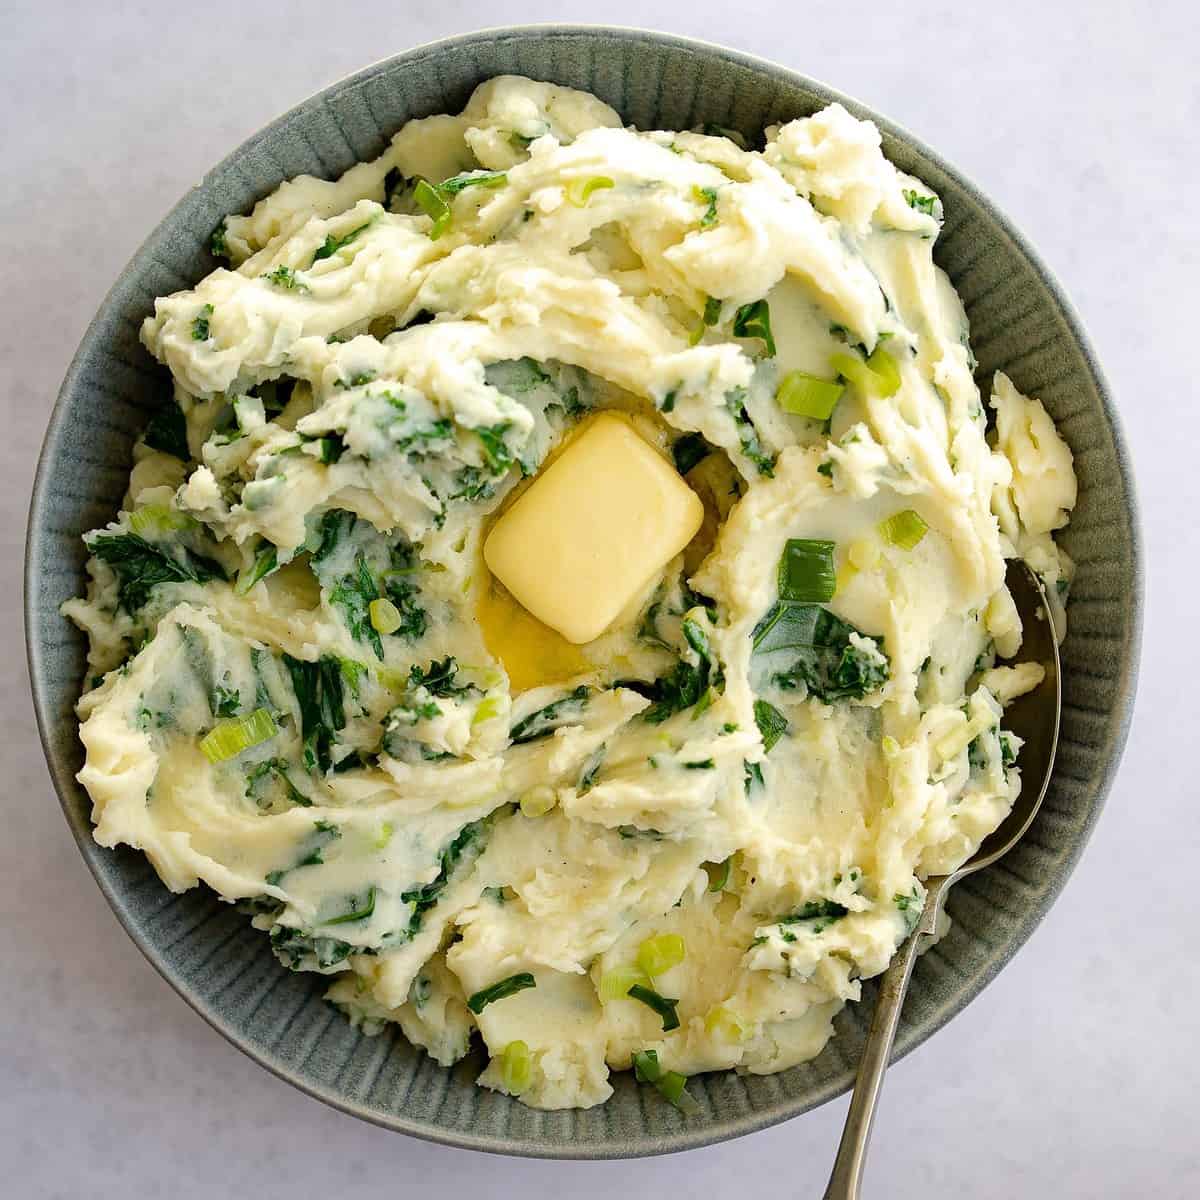  Who says comfort food can't be good for you? Enjoy our Colcannon guilt-free!